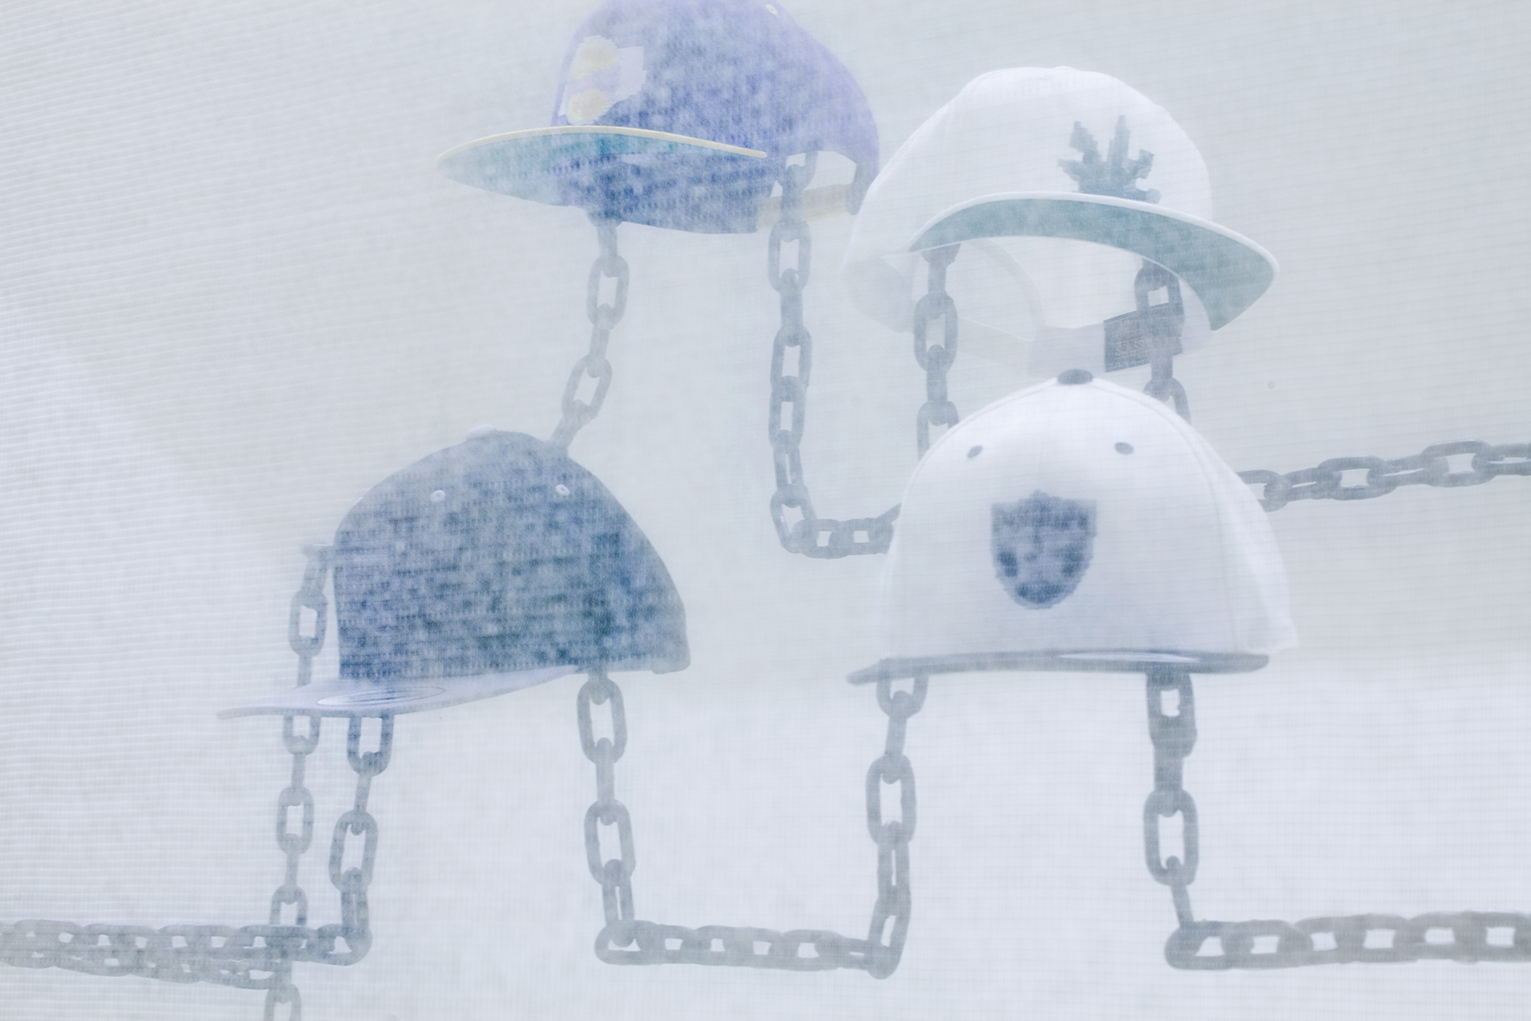  Robin Jiro Margerin  Express yourself (Chain gang)  2014 Six digitally blurred logos embroidered on classic snap-back caps, welded steel chain, color inkjet print Courtesy of the artist 